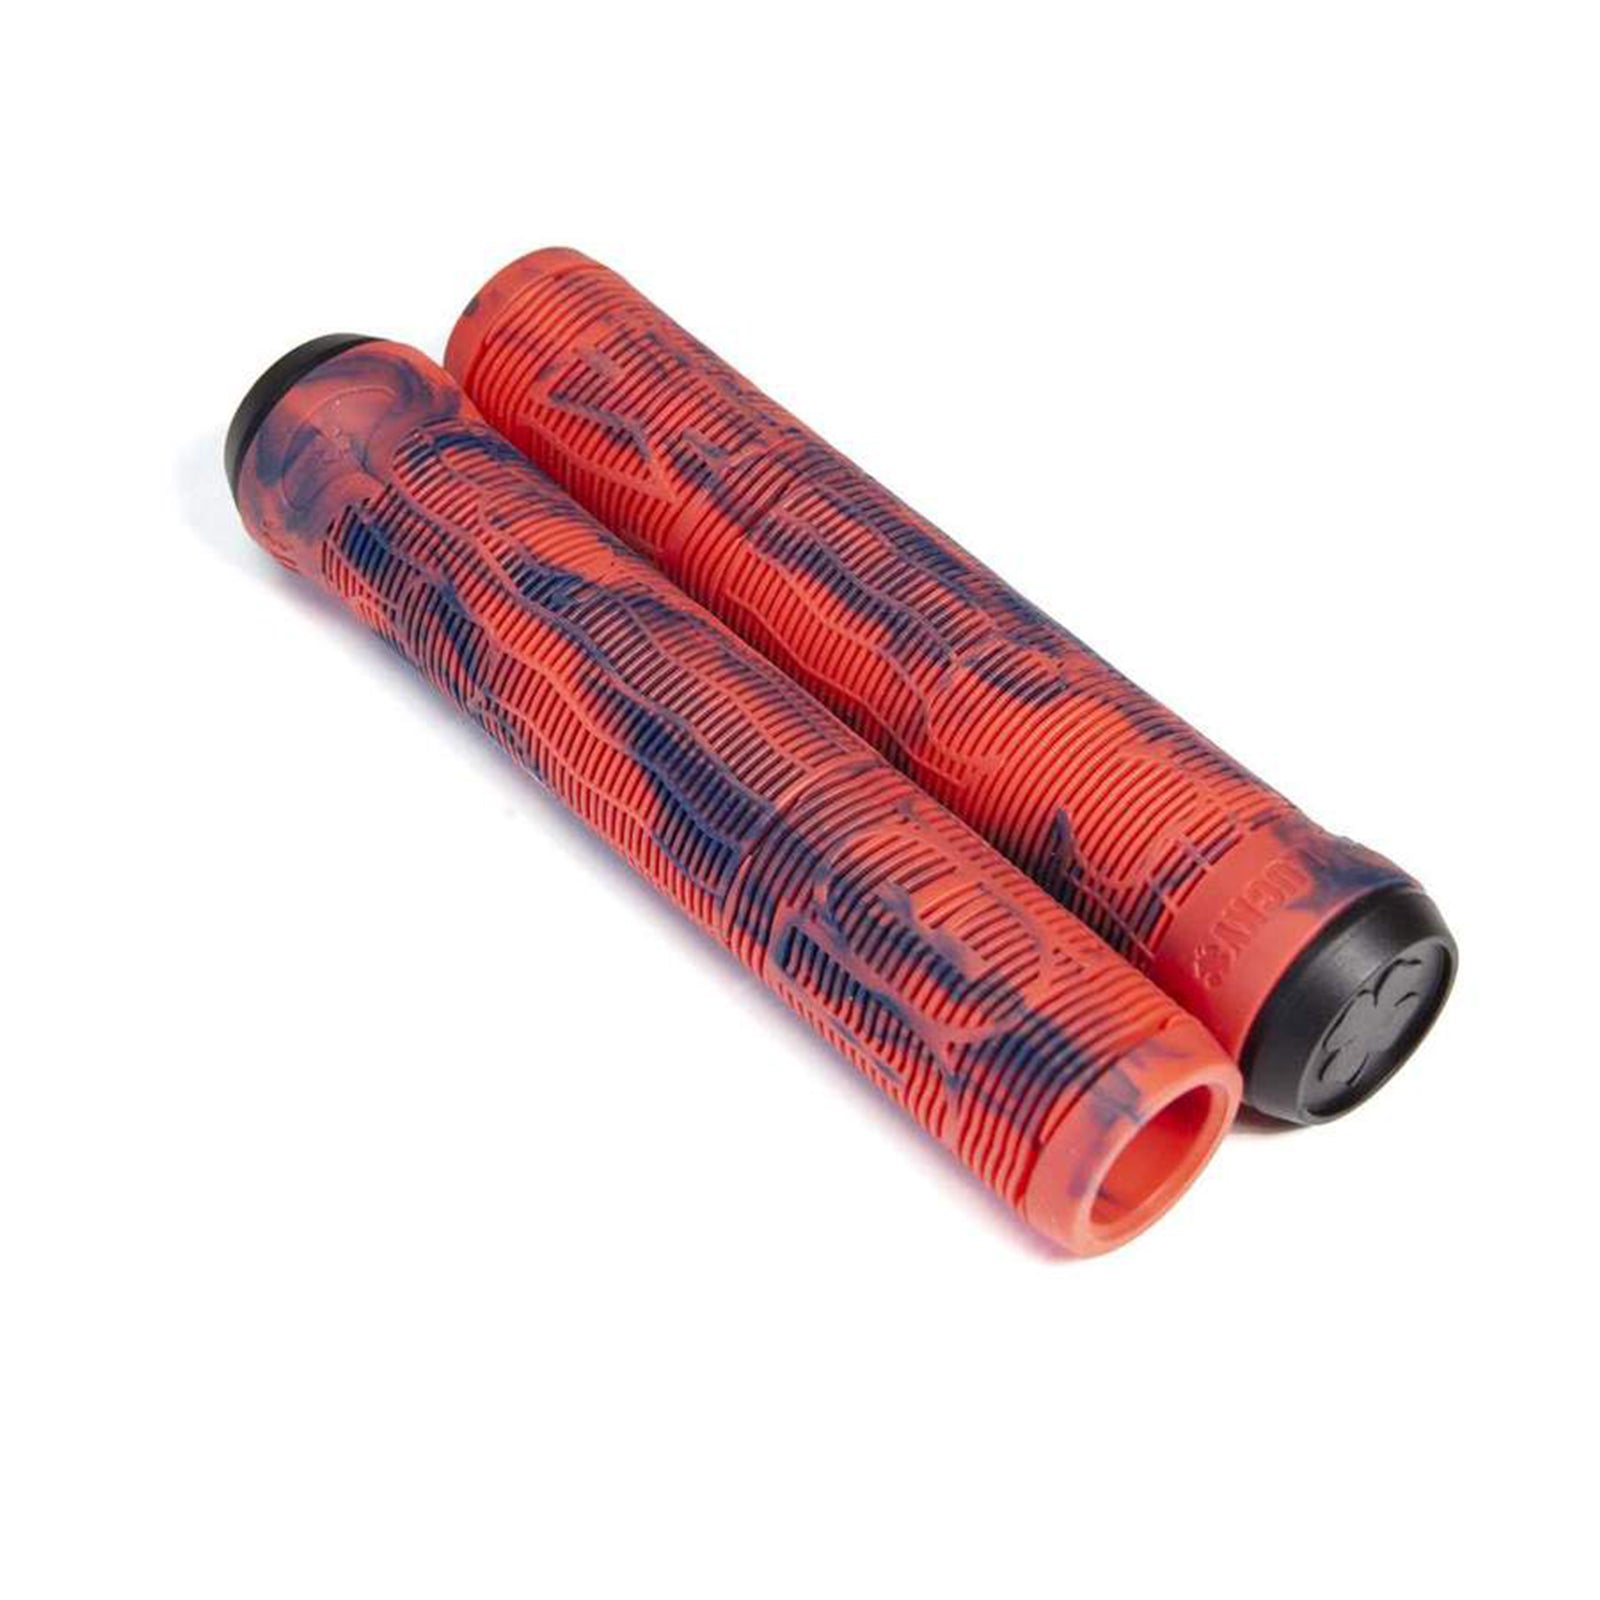 Lucky ViceGrips 2.0 Grips Red/Blue